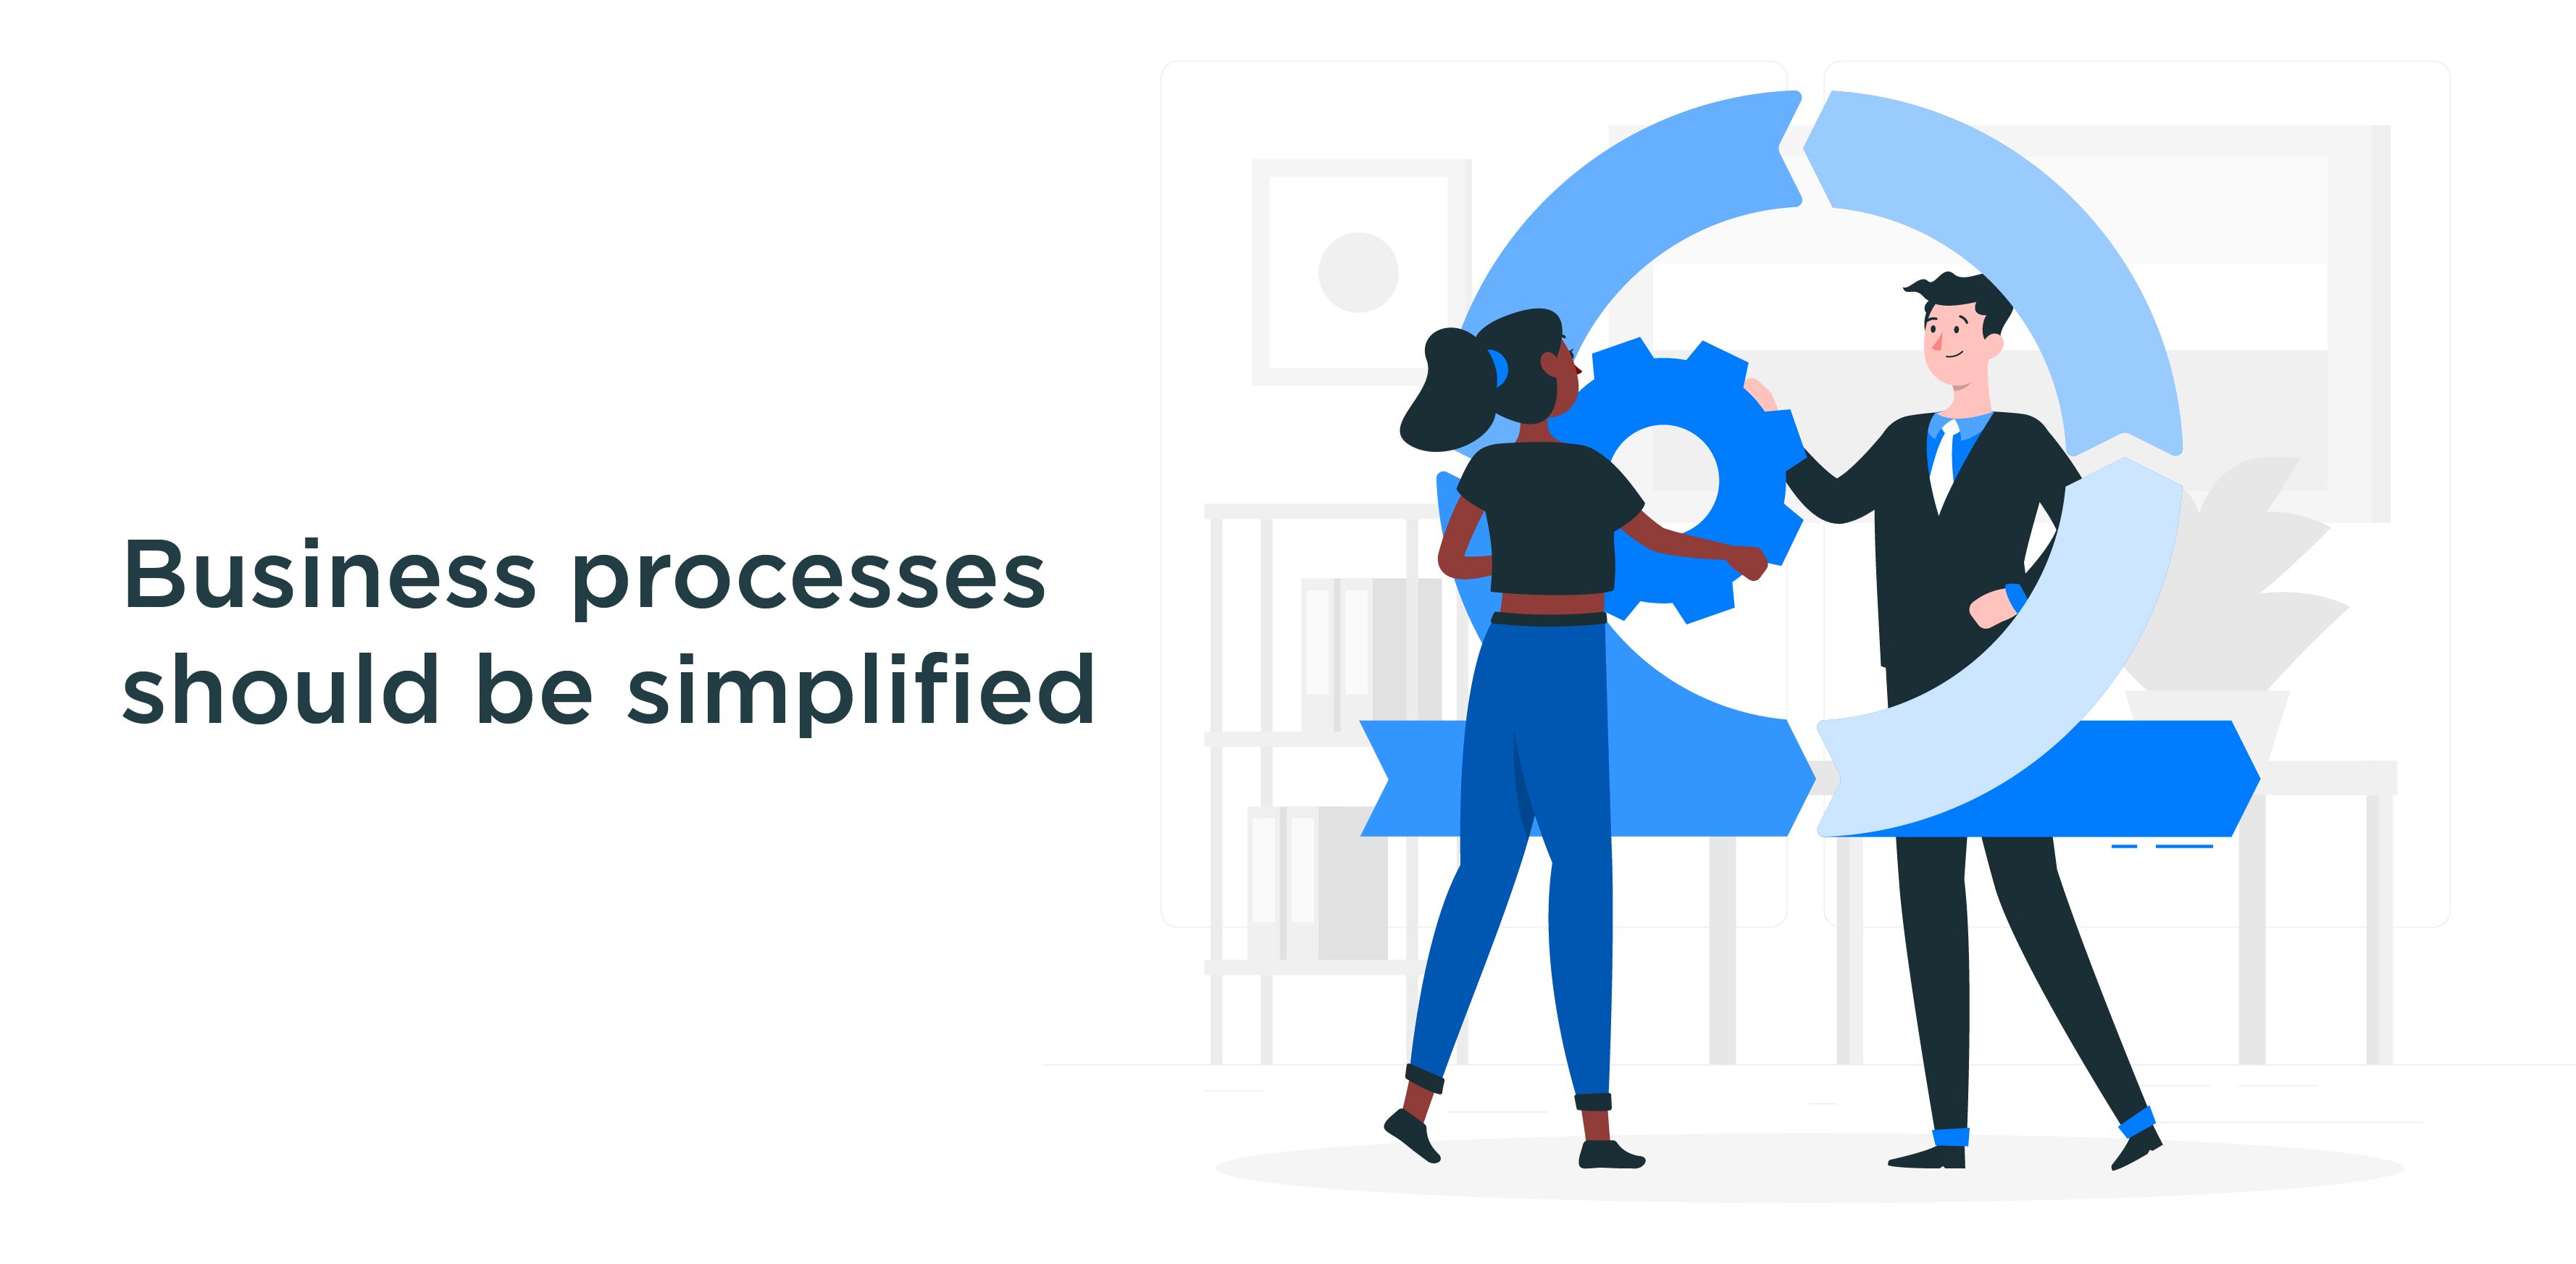 Business processes should be simplified